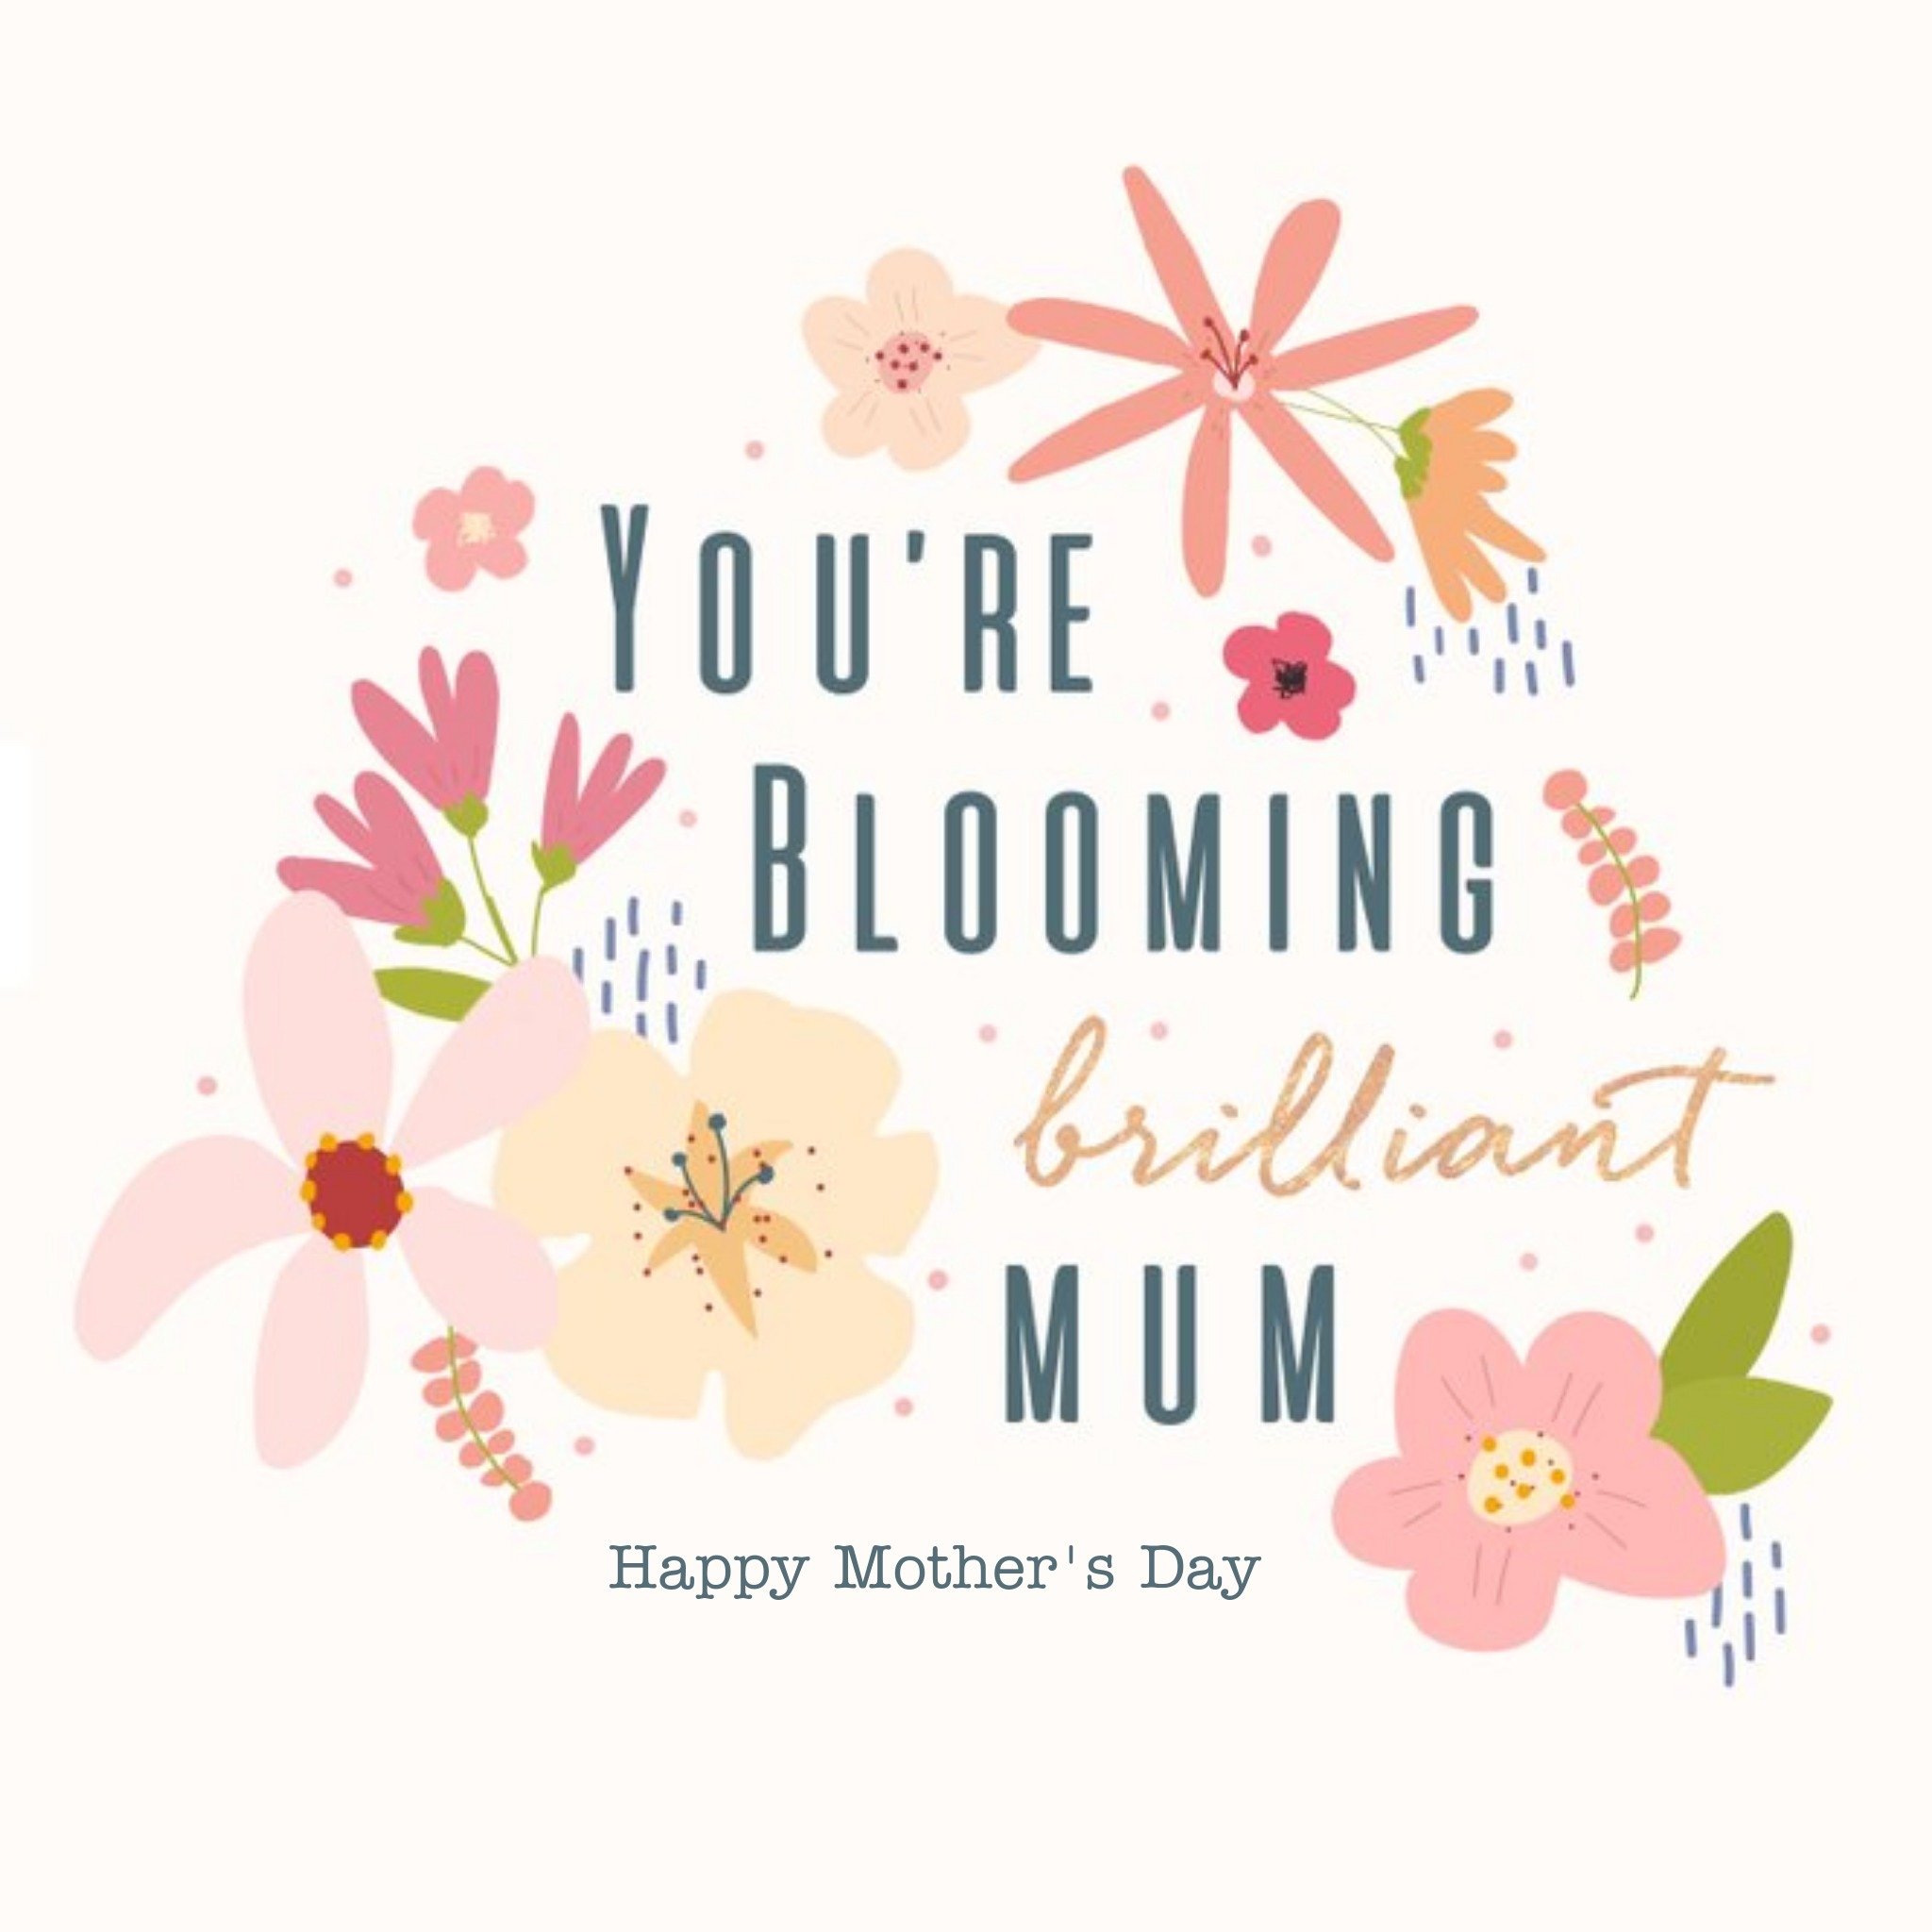 Moonpig Blooming Brilliant Mum Modern Floral Design Mothers Day Card, Square